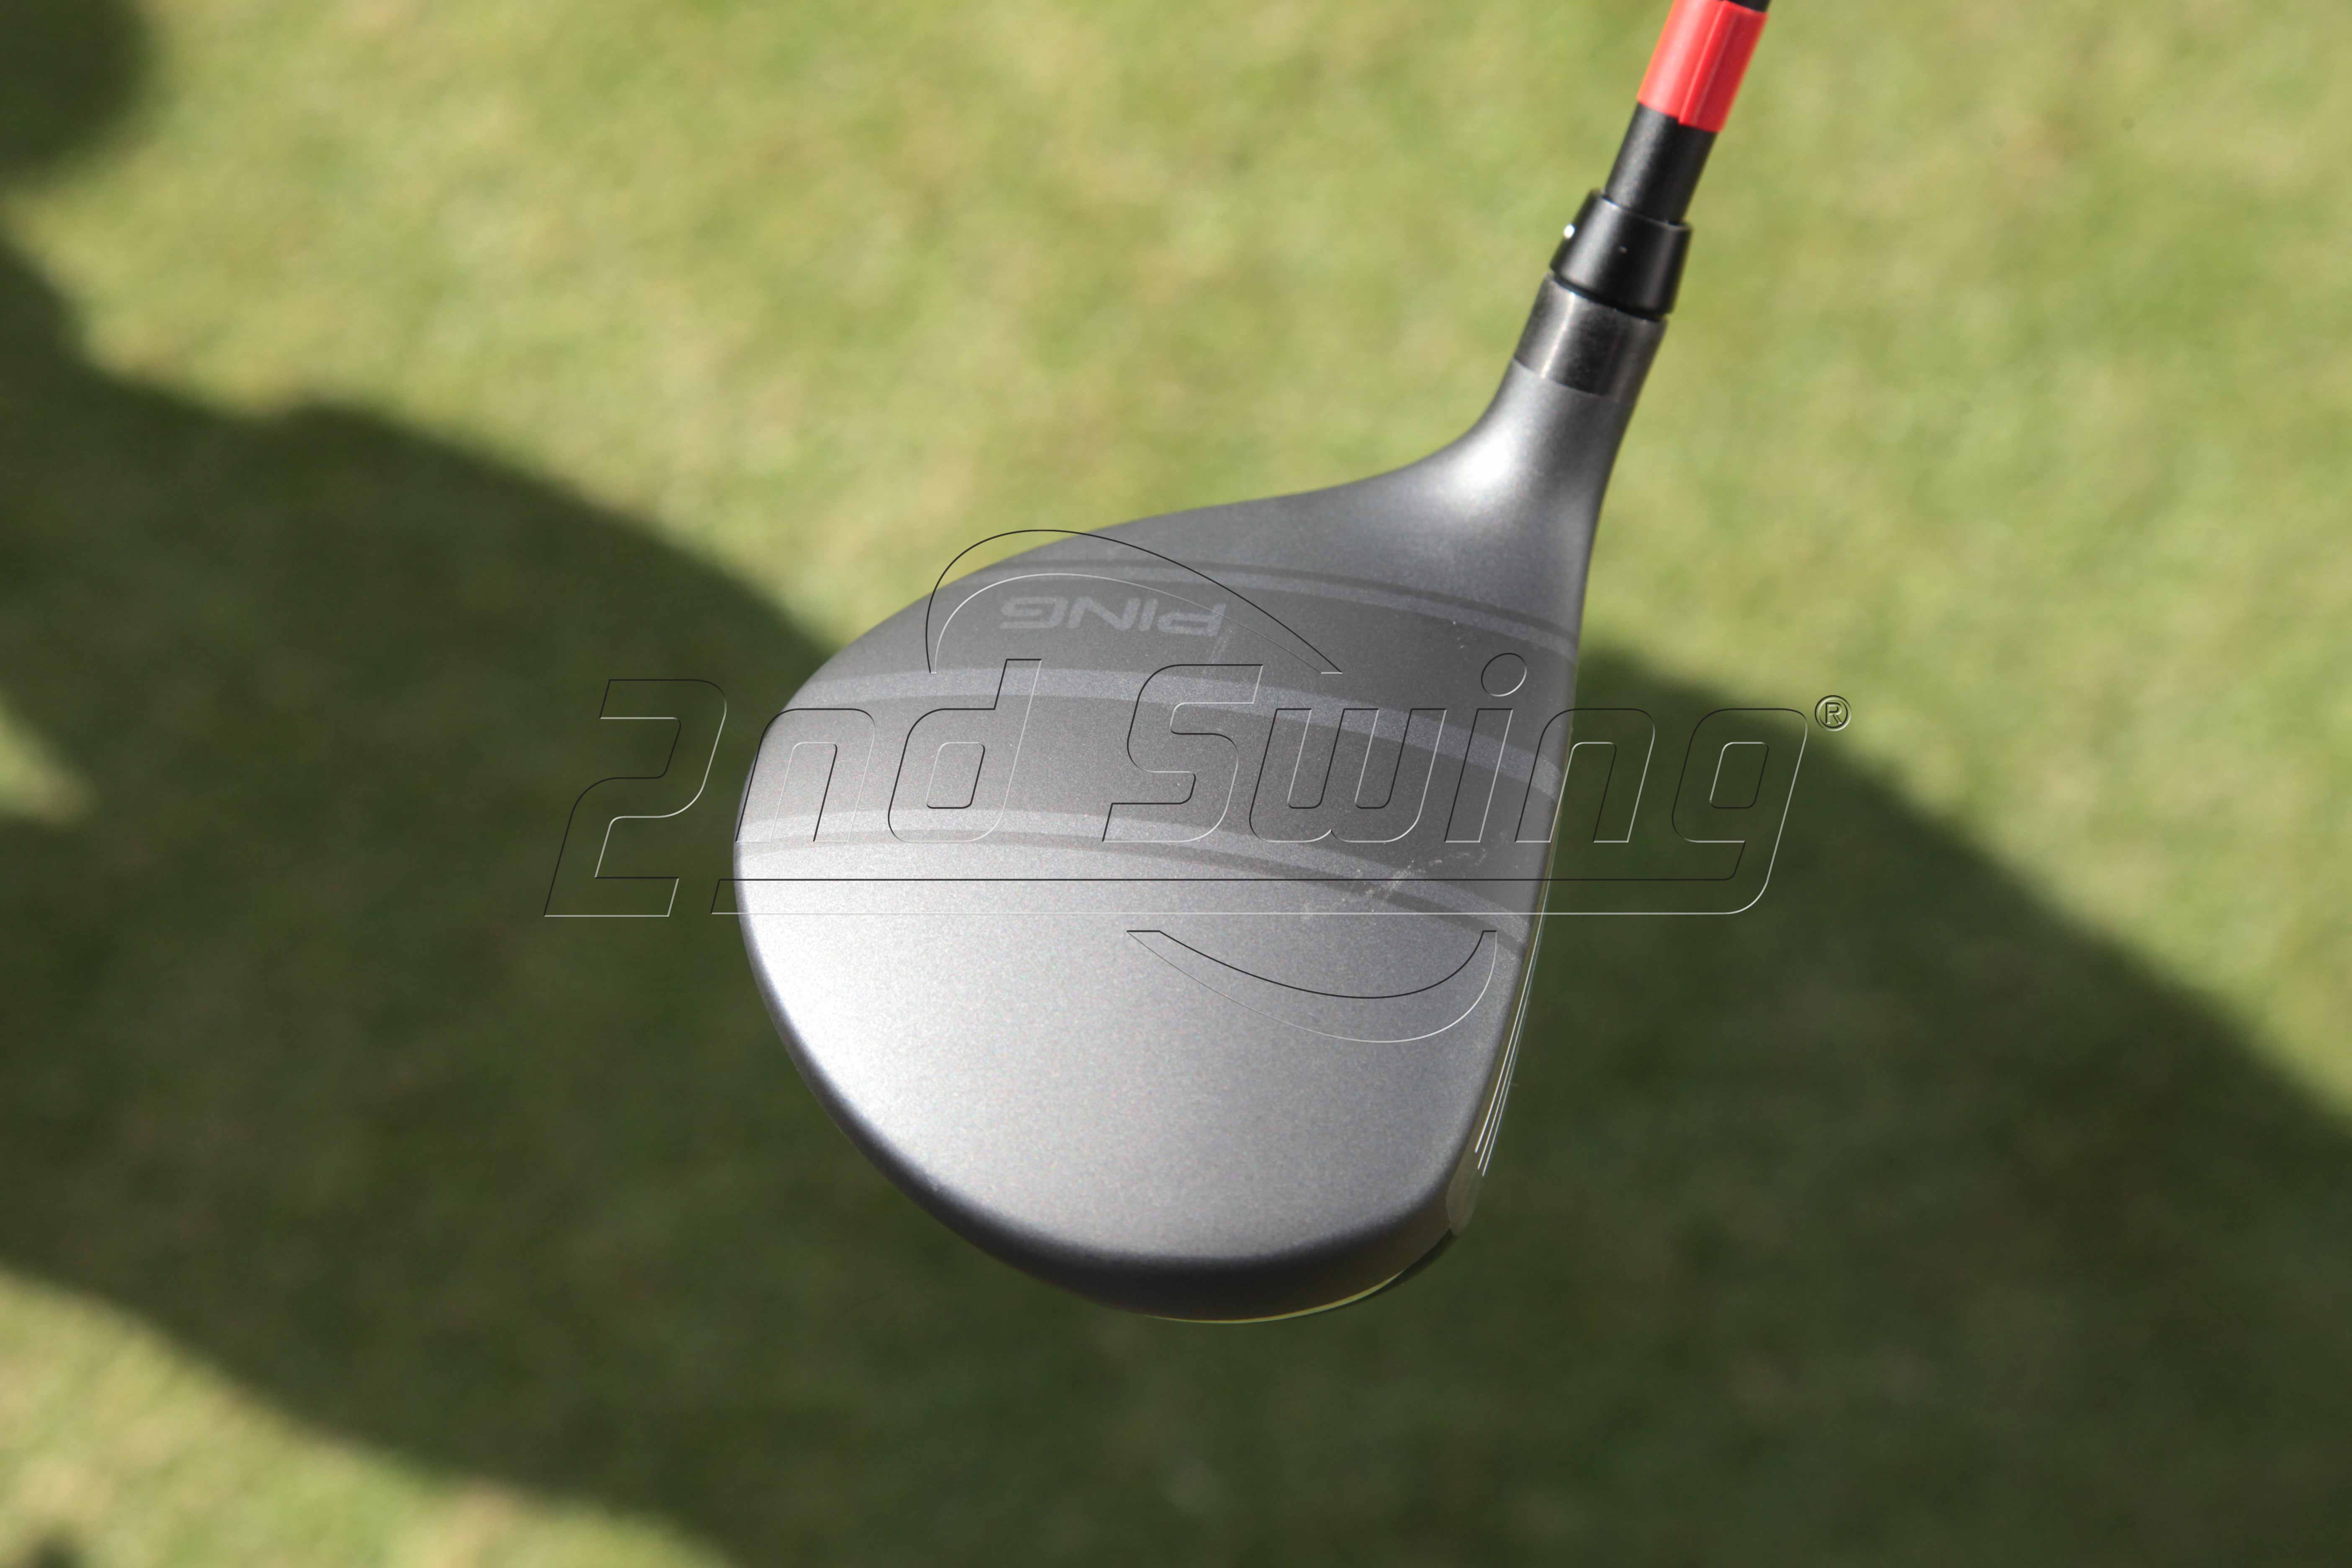 2014 Ping i25 Fairway Woods Review